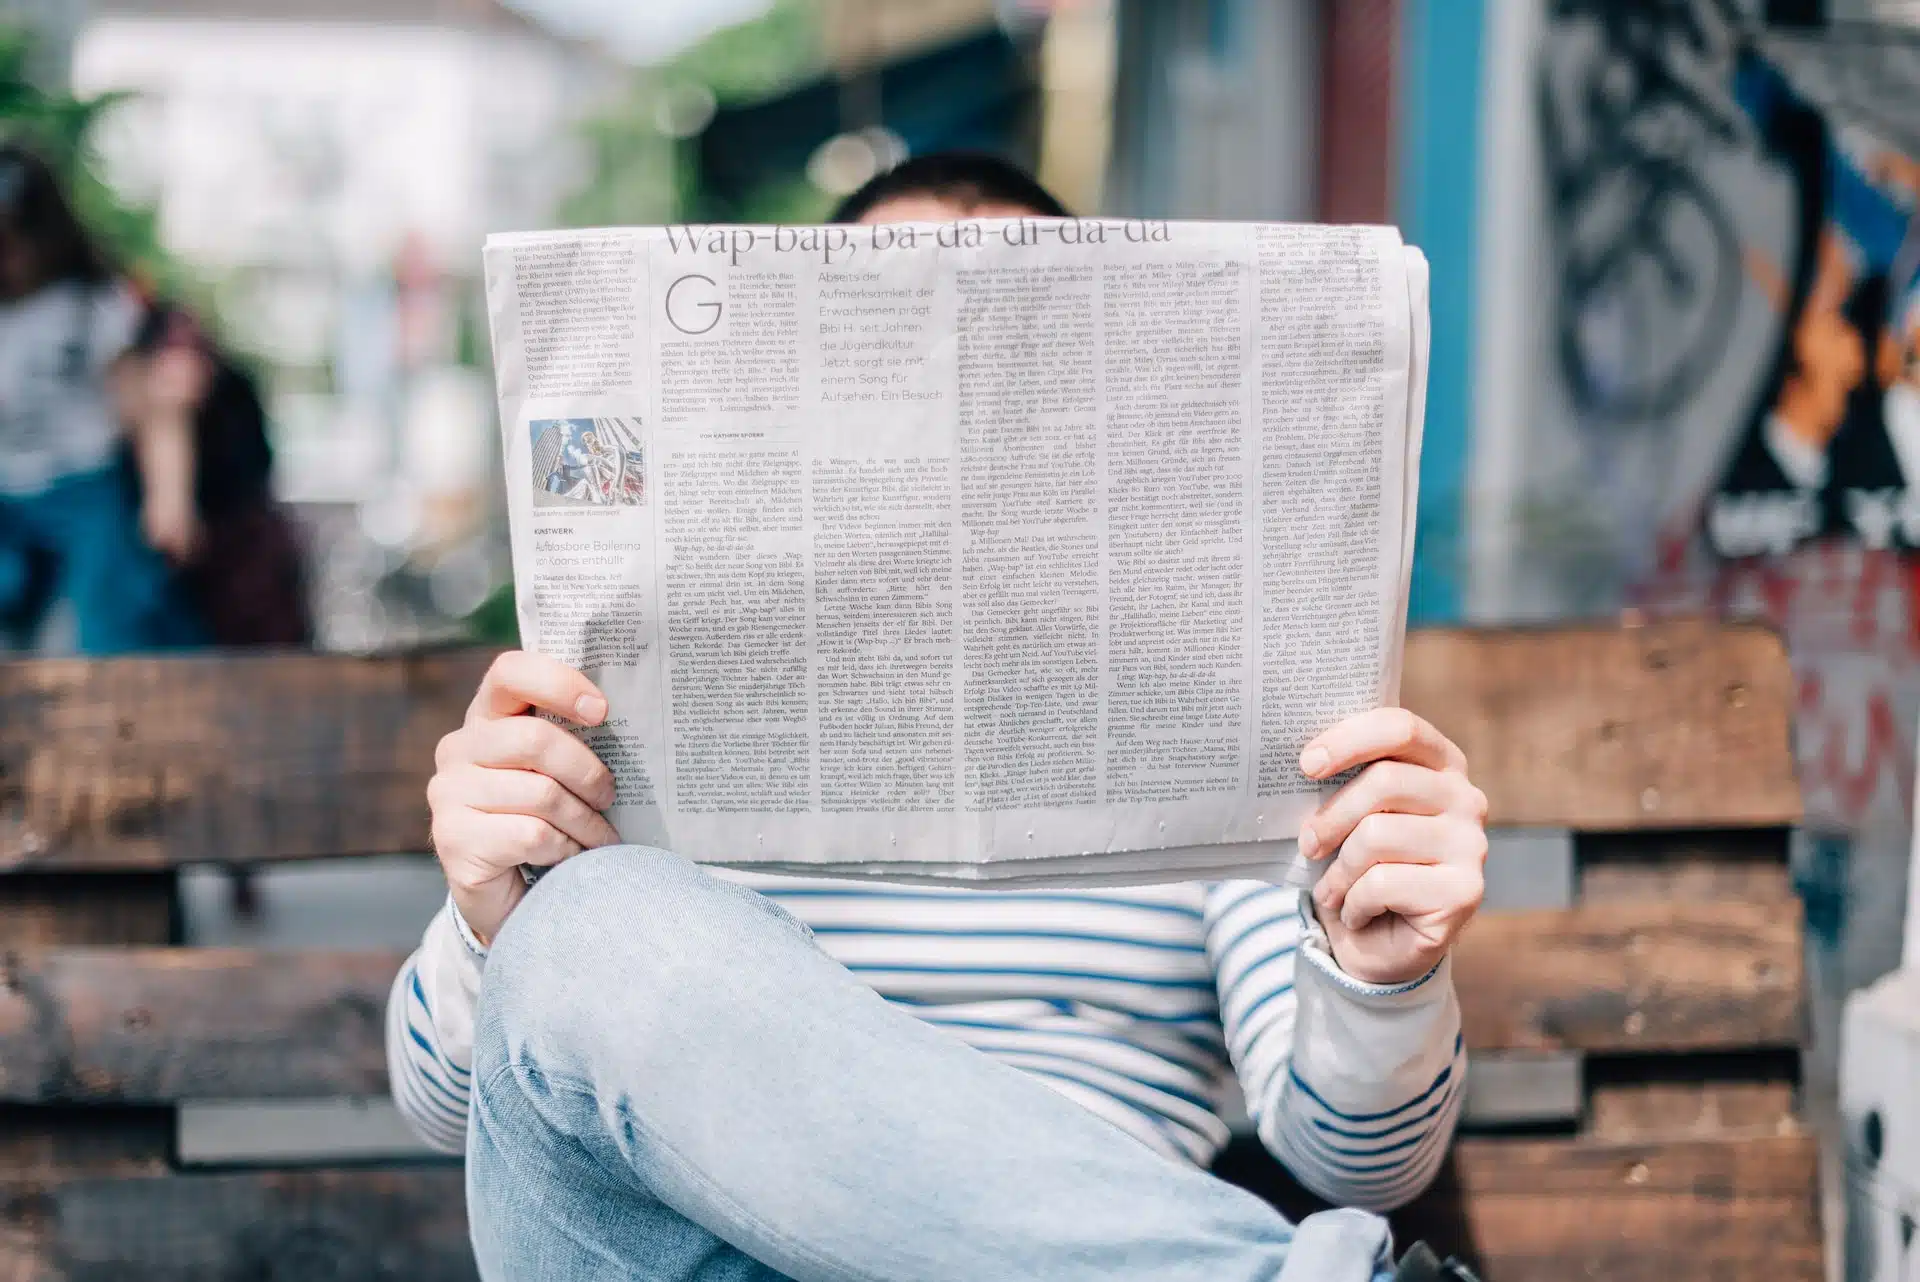 Photograph of man reading a newspaper